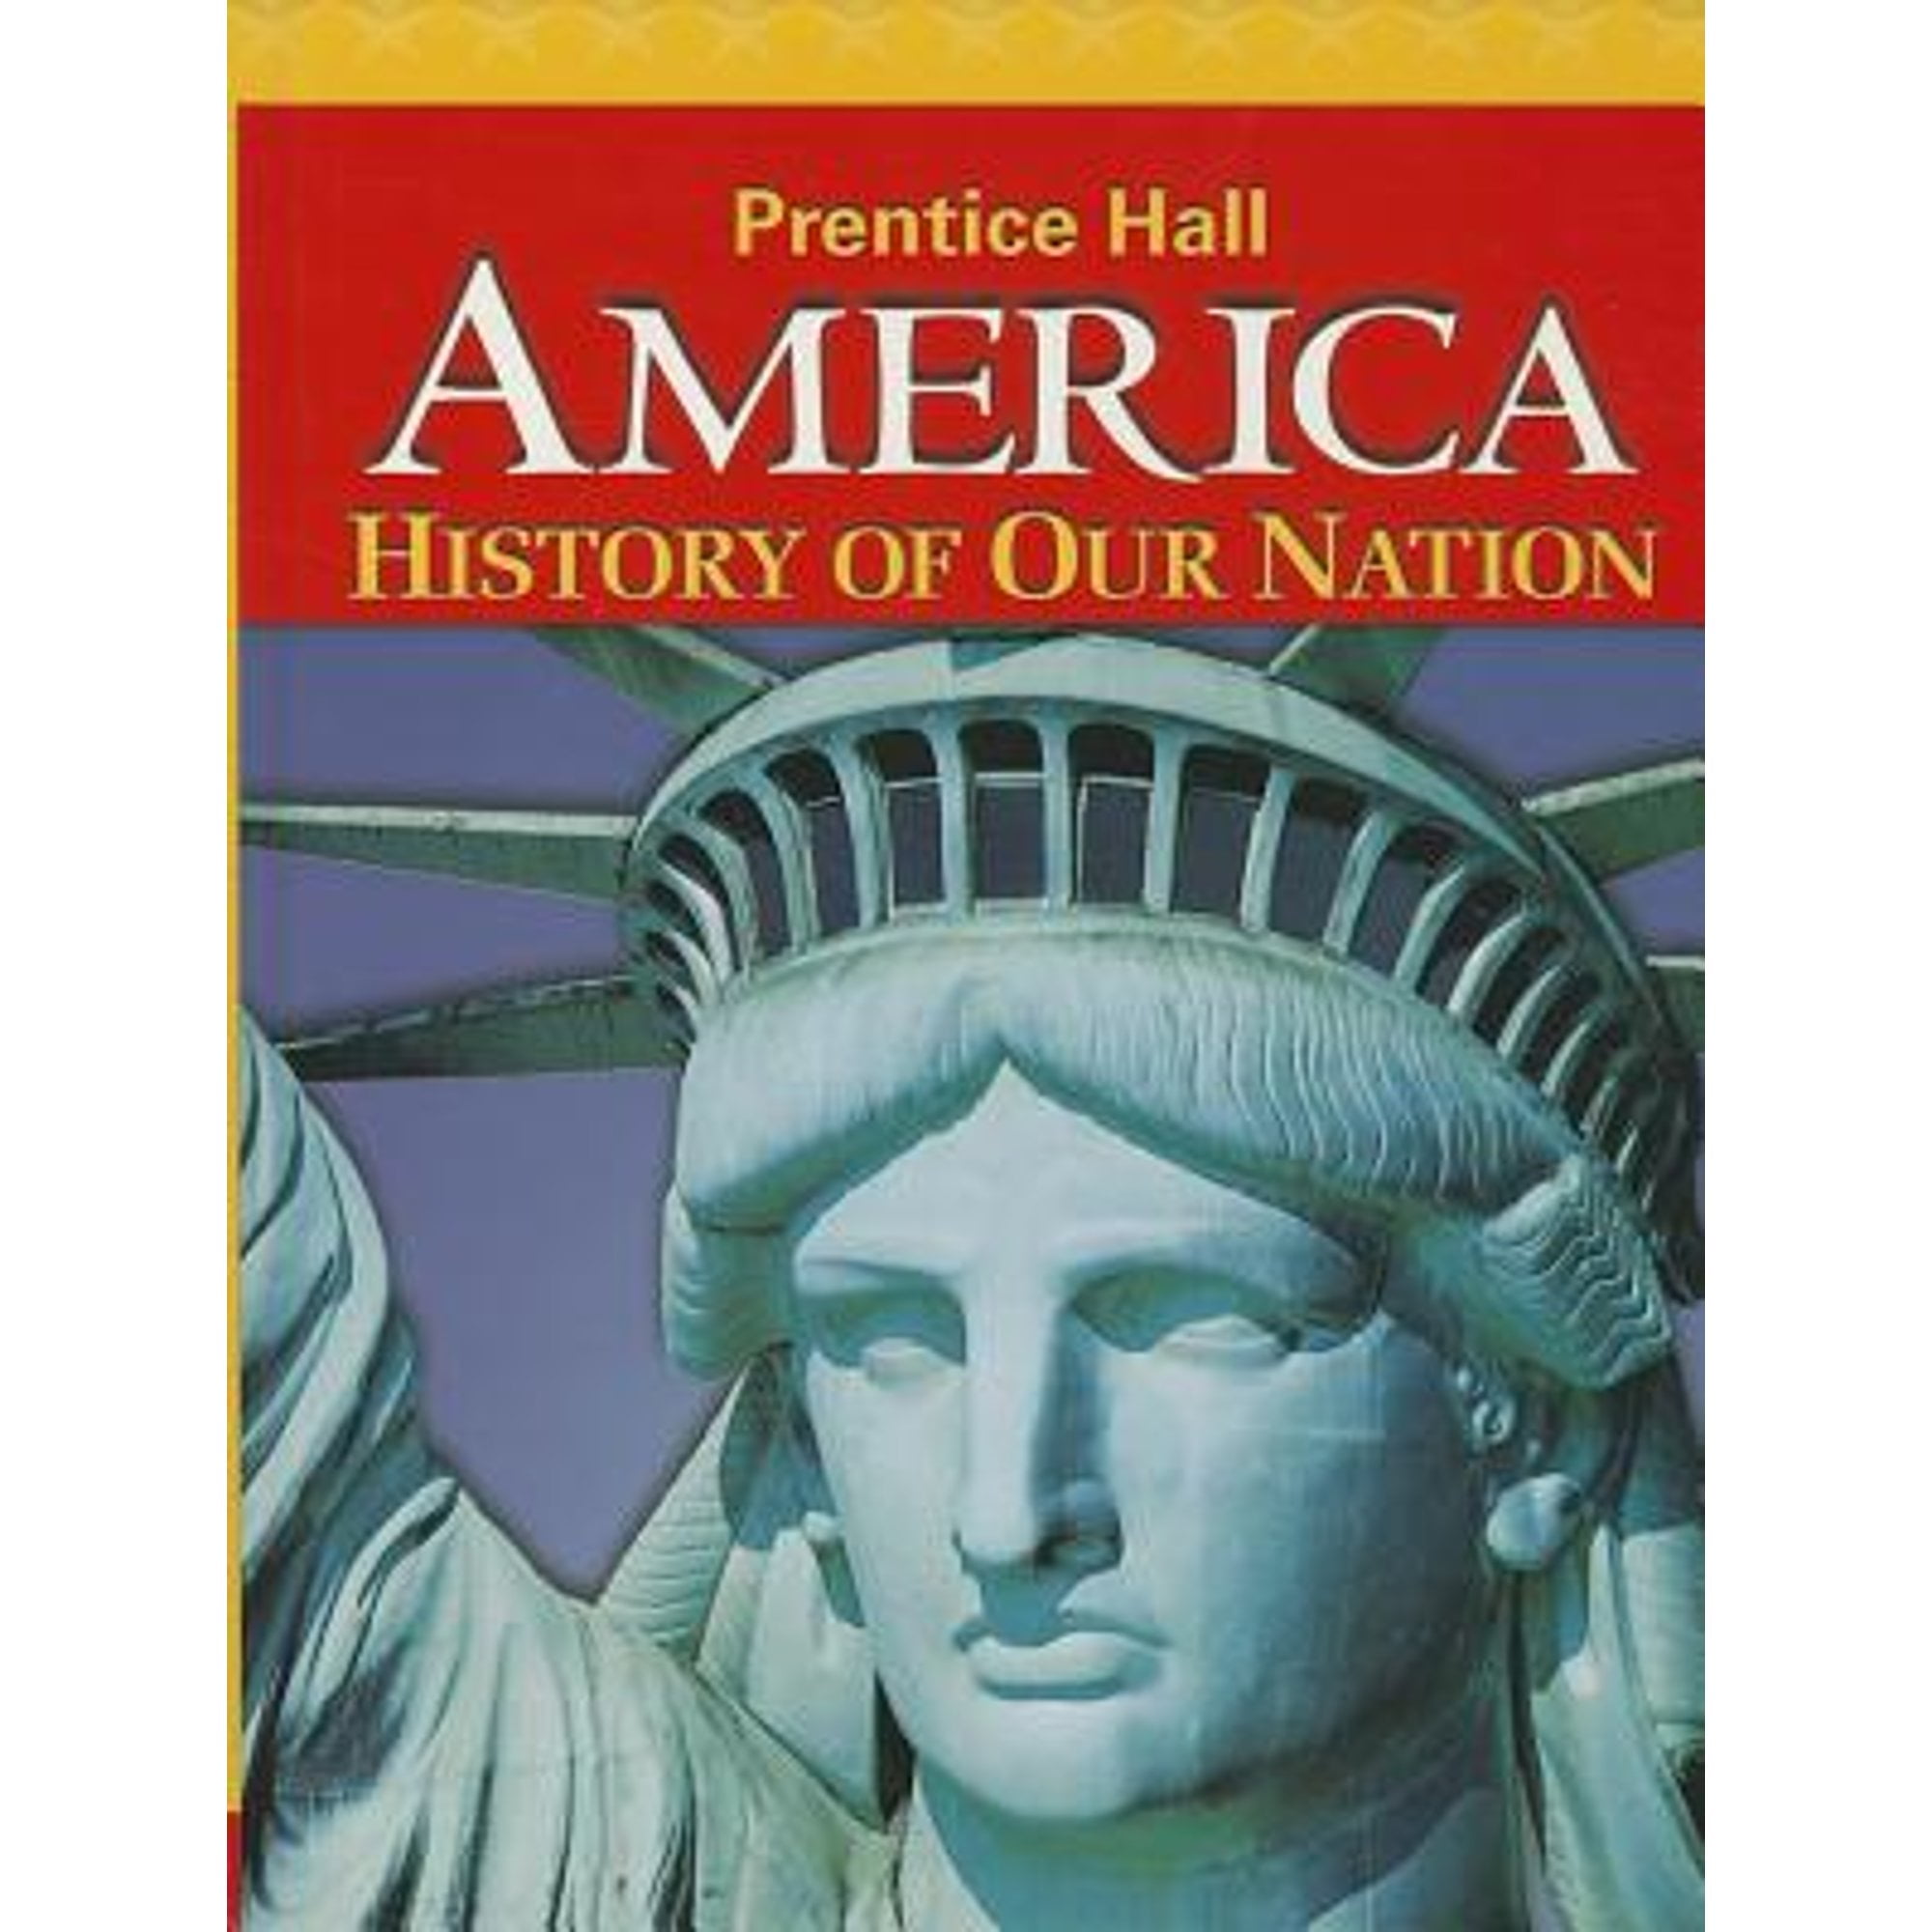 (Hardcover　Grade　History　Nation　America:　Our　Student　Edition　9780133230048)　2014　of　Pre-Owned　Survey